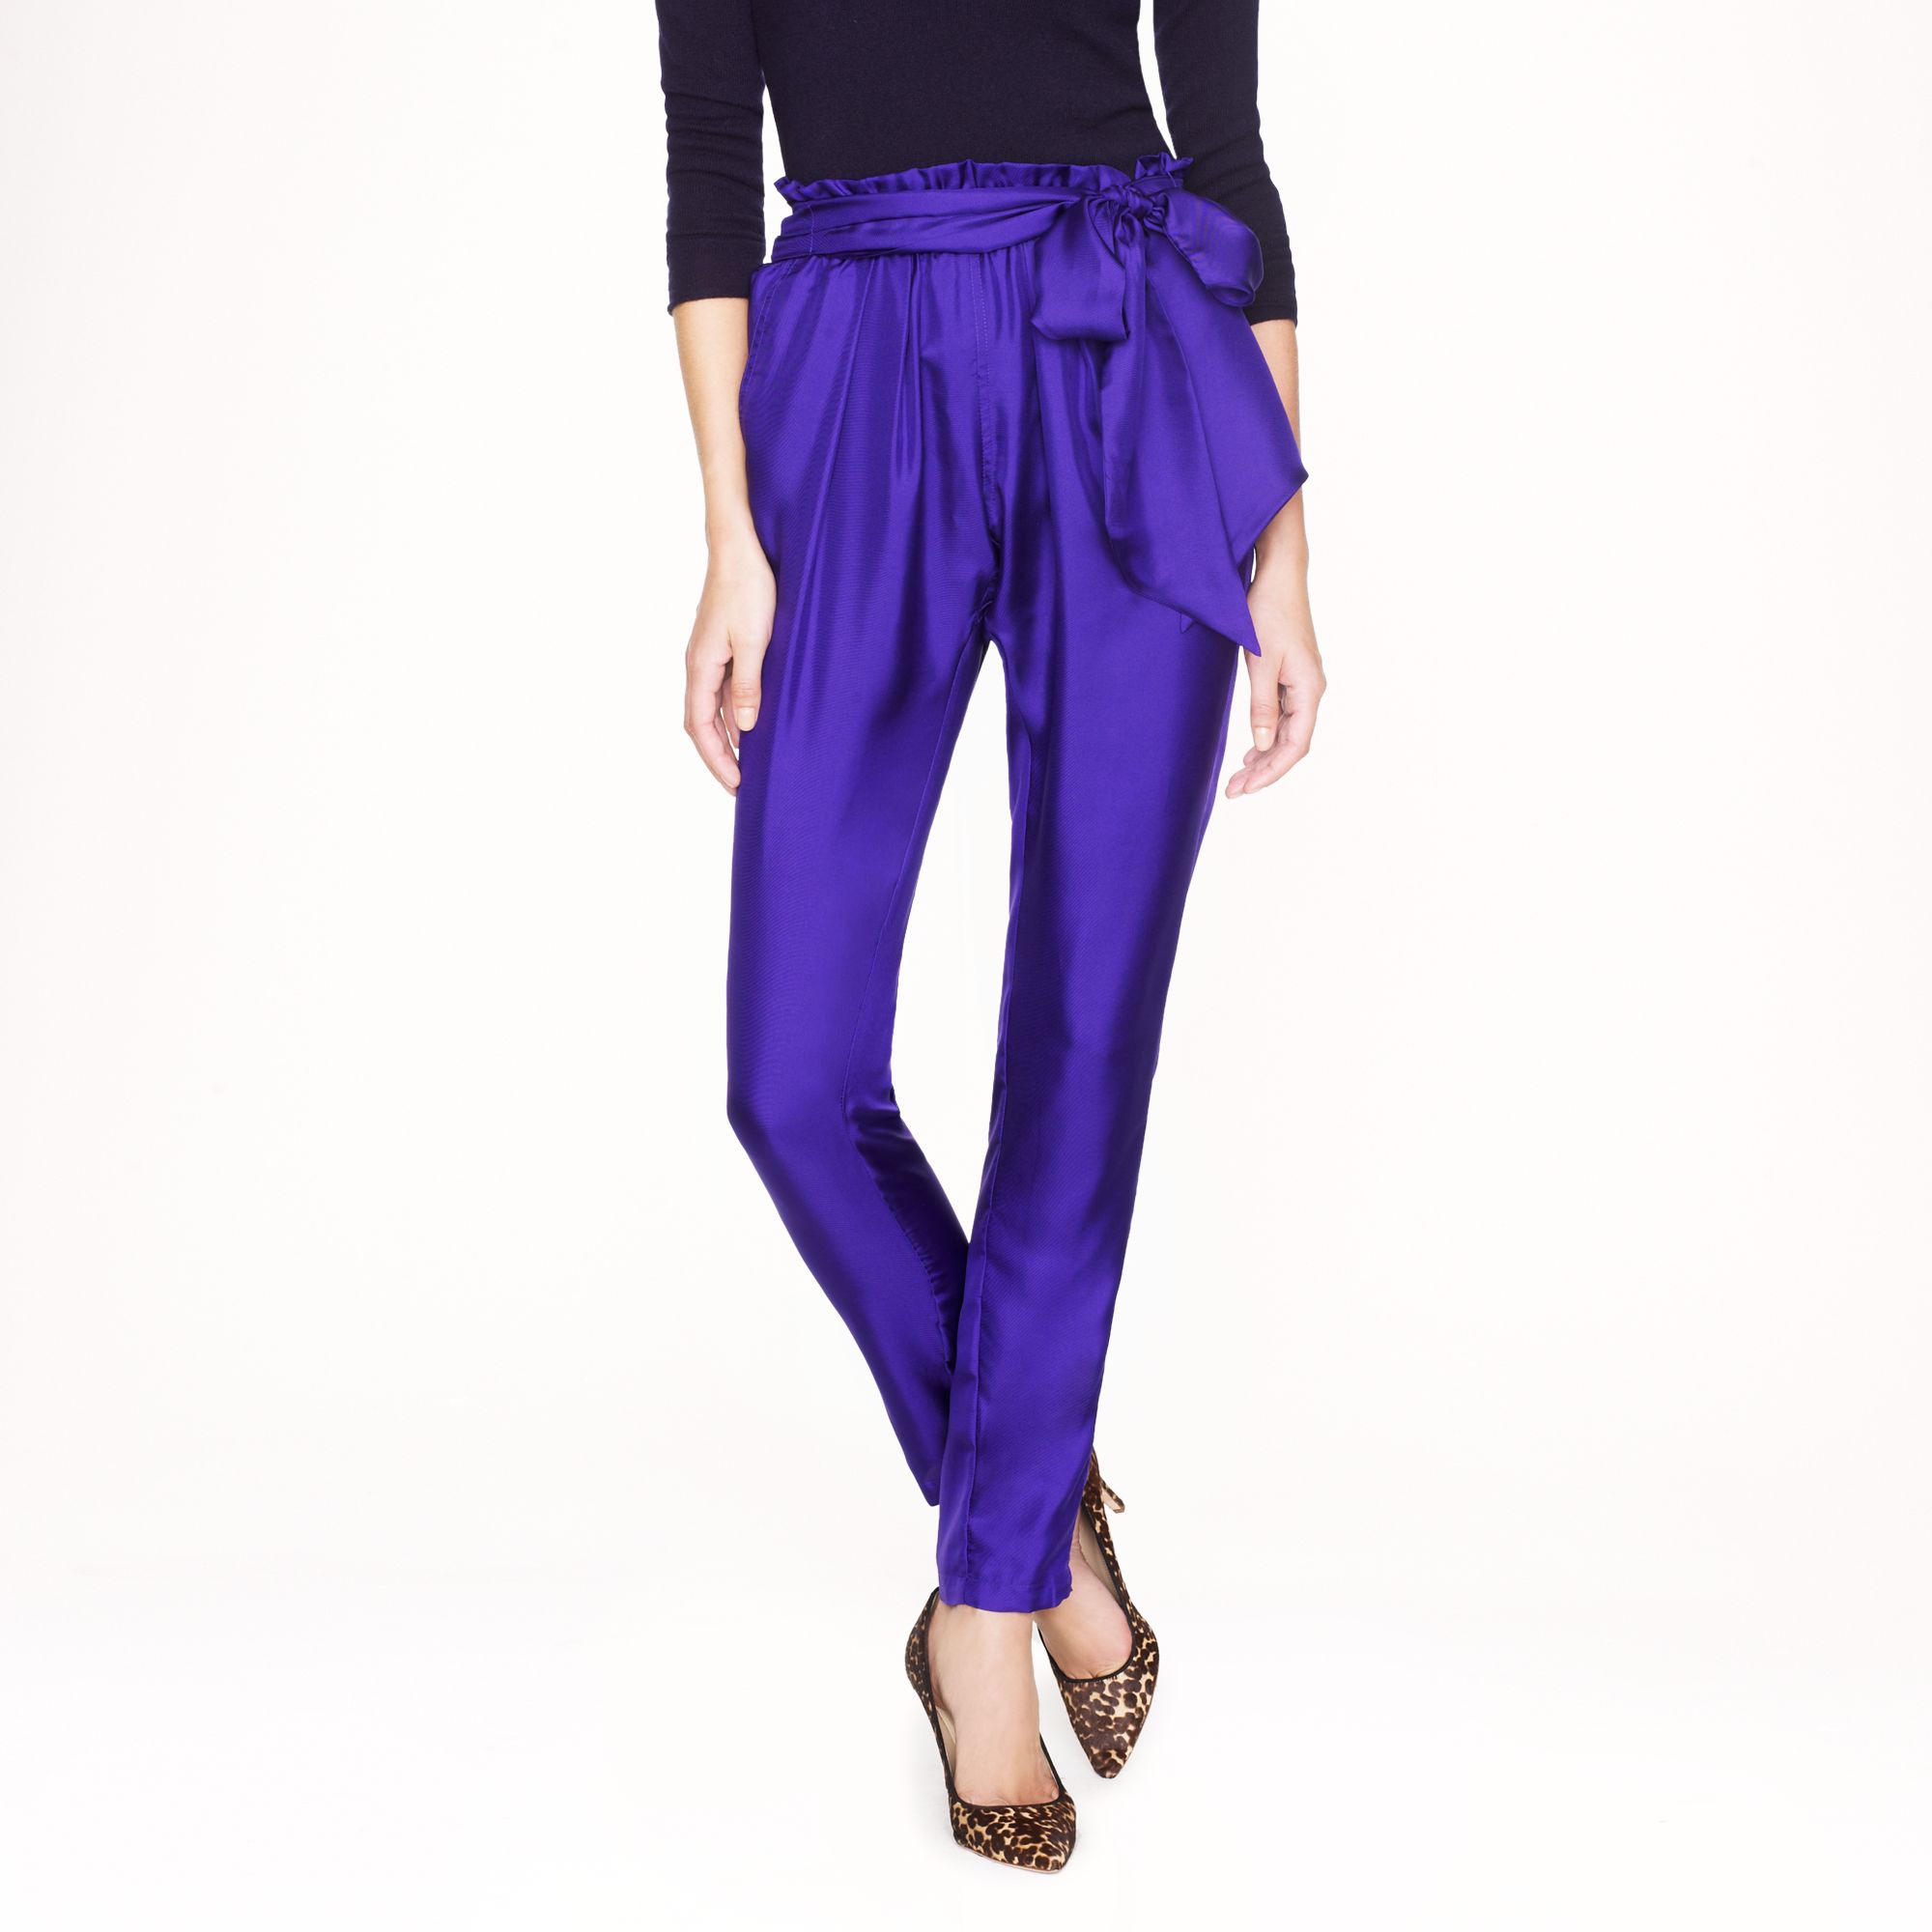 J.Crew Piamita™ Sienna Pant | Fancy Friday - Fancy Pants Holiday Pieces